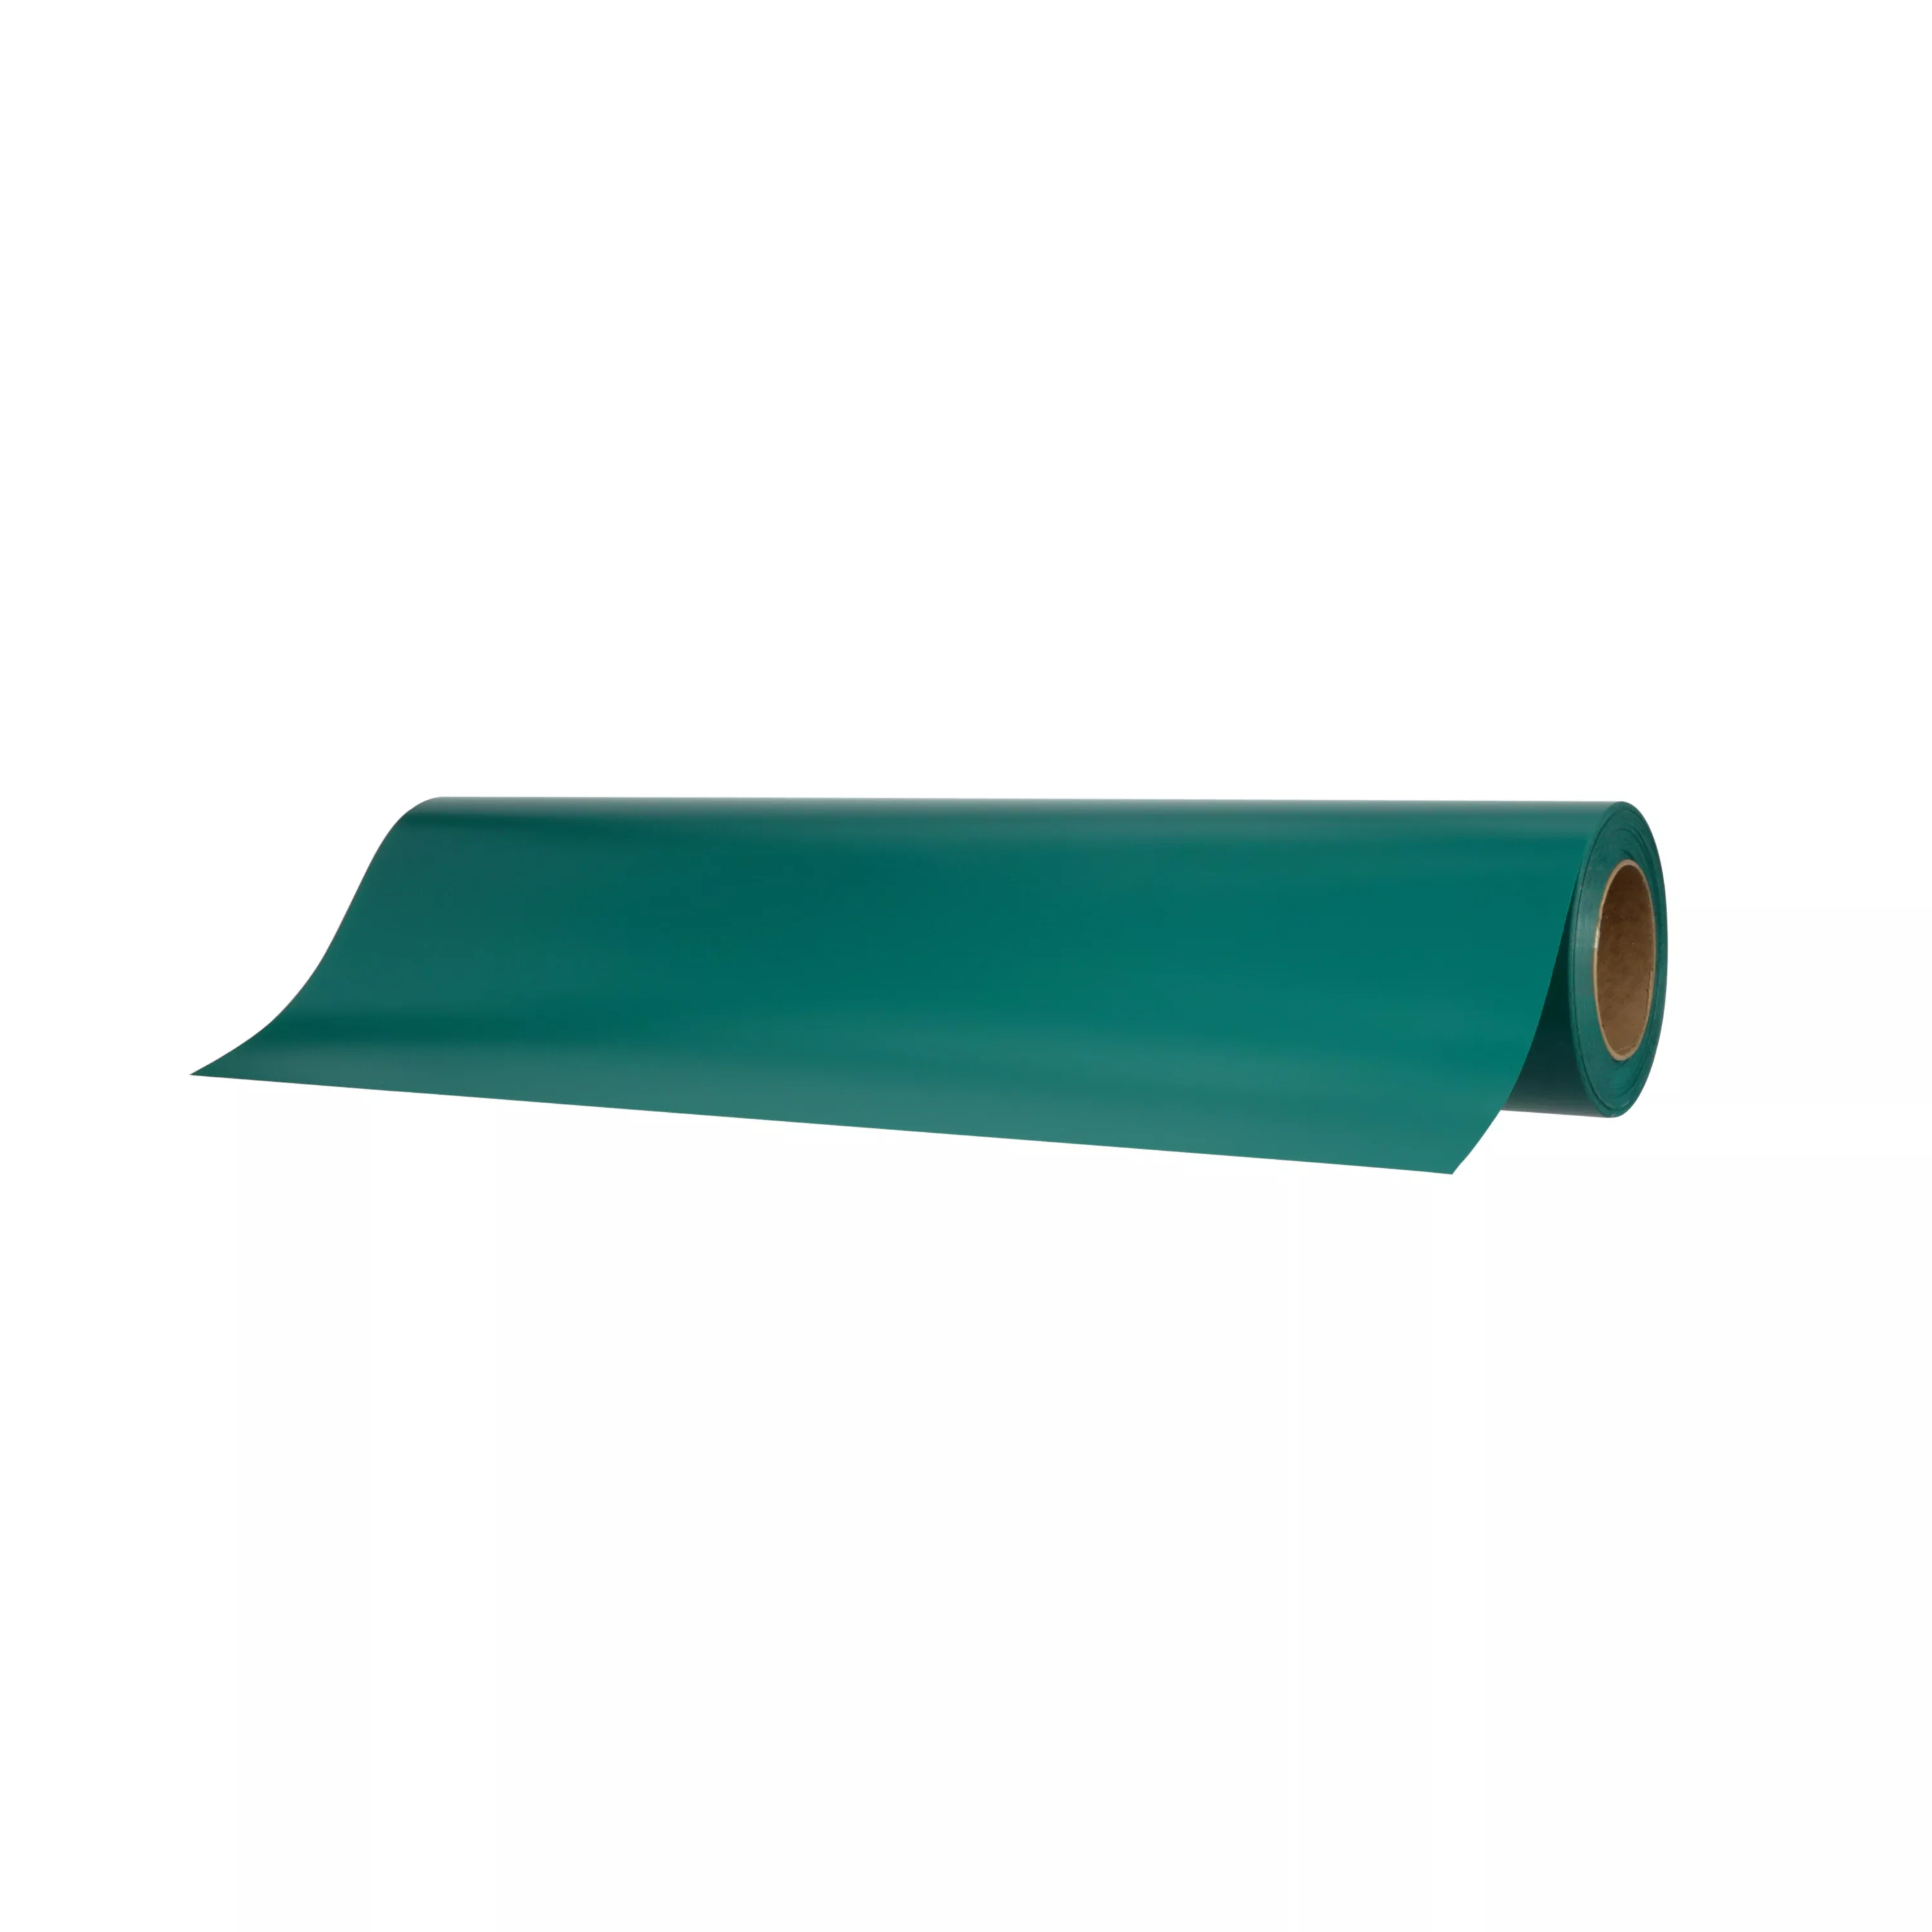 3M™ Scotchcal™ Translucent Graphic Film 3630-316, Jade Green, 48 in x 50
yd, 1 Roll/Case